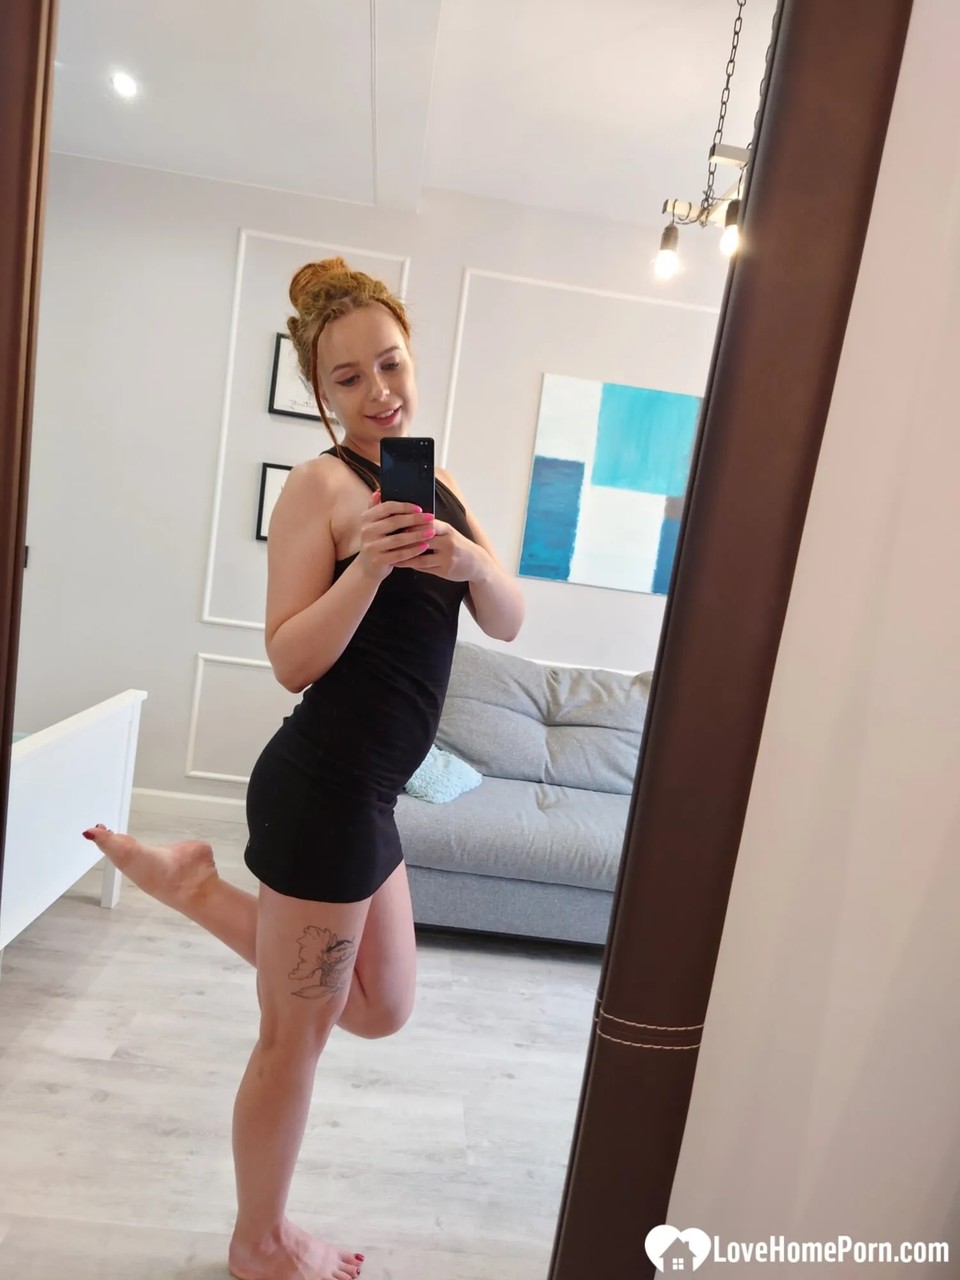 Playful Ginger Amateur Exposes Her Tiny Boobs In Her Selfie Compilation